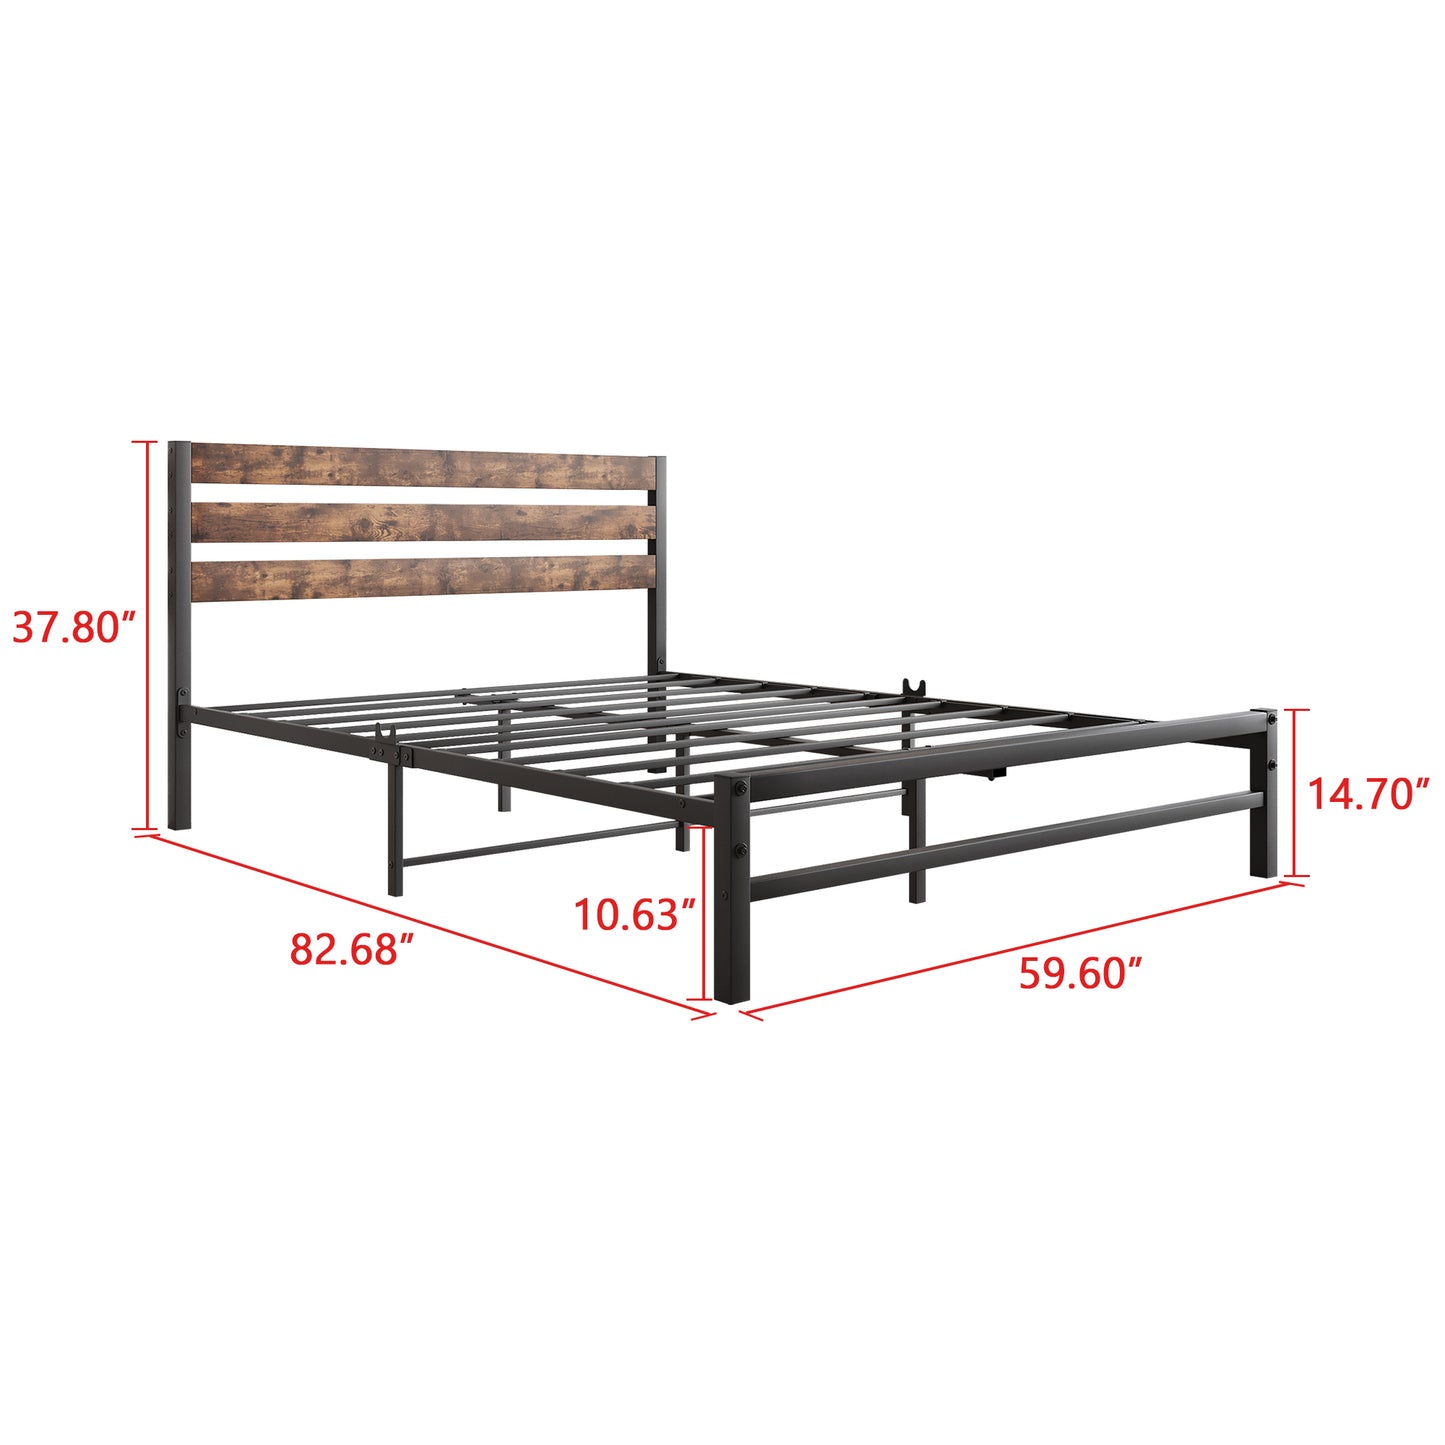 Queen Size Platform Bed Frame with Rustic Vintage Wood Headboard, Strong Metal Slats Support Mattress Foundation, No Box Spring Needed Rustic Brown